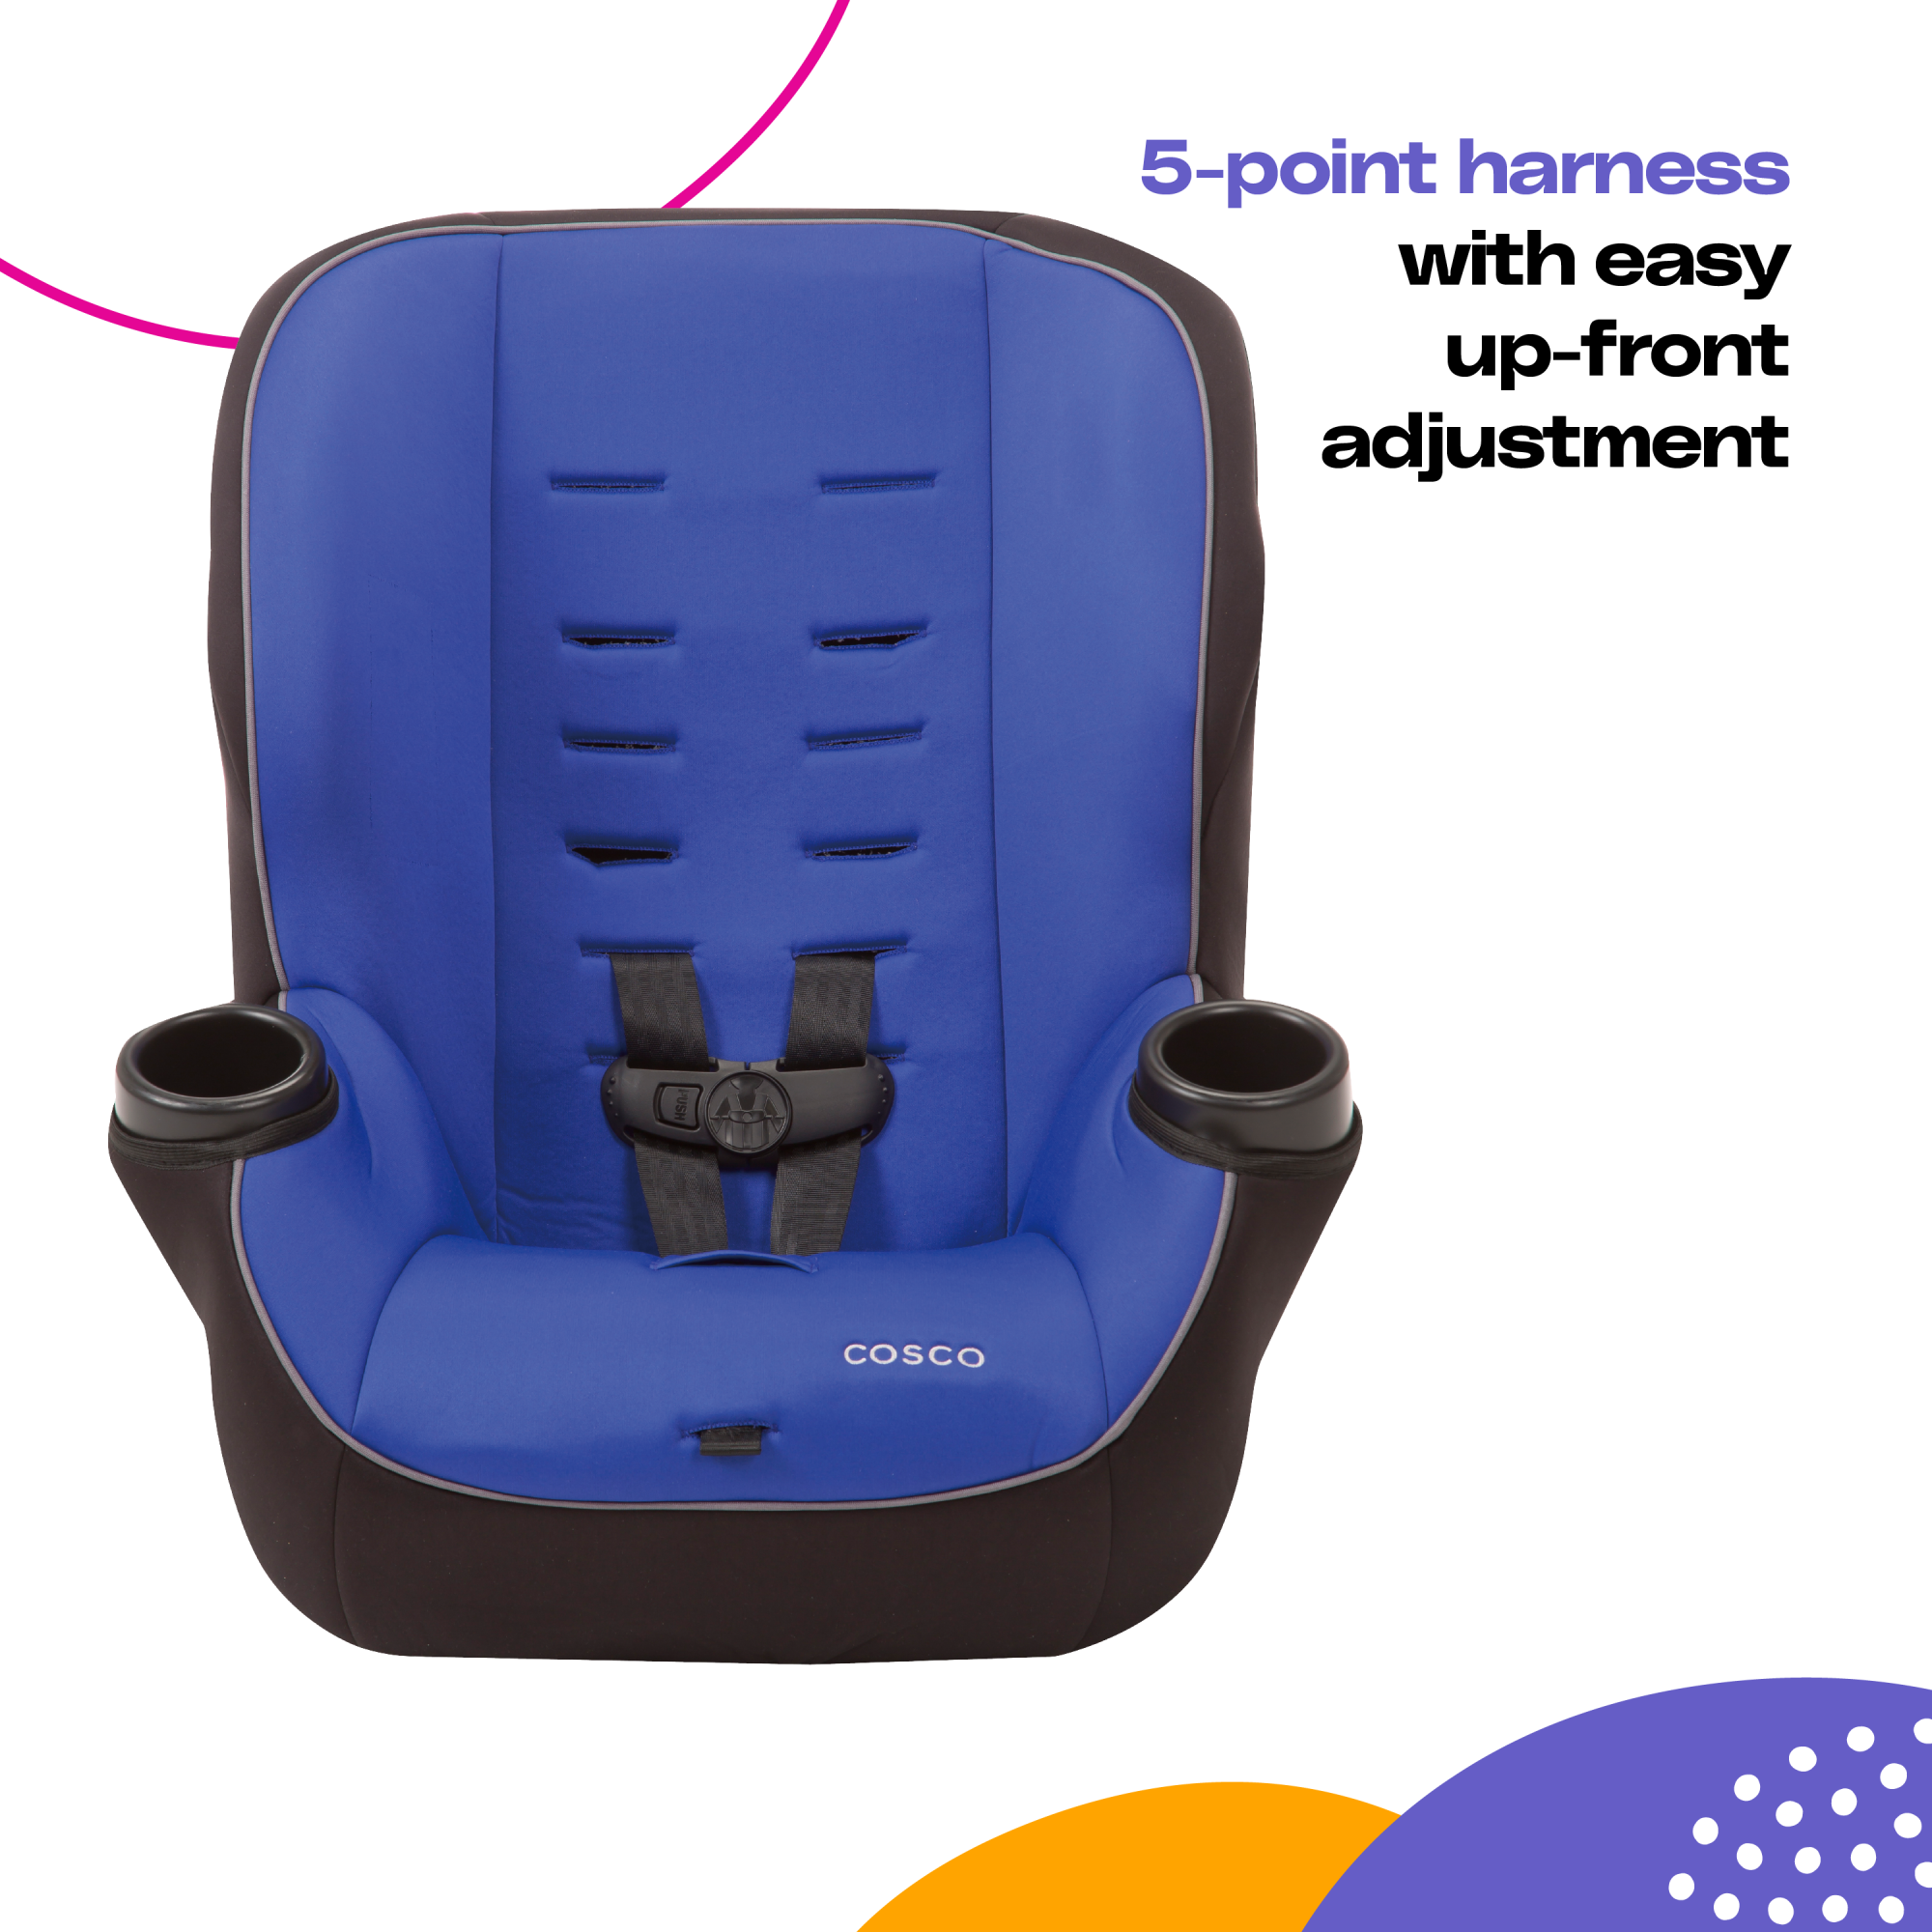 Onlook 2-in-1 Convertible Car Seat - 5-point harness with easy up-front adjustment